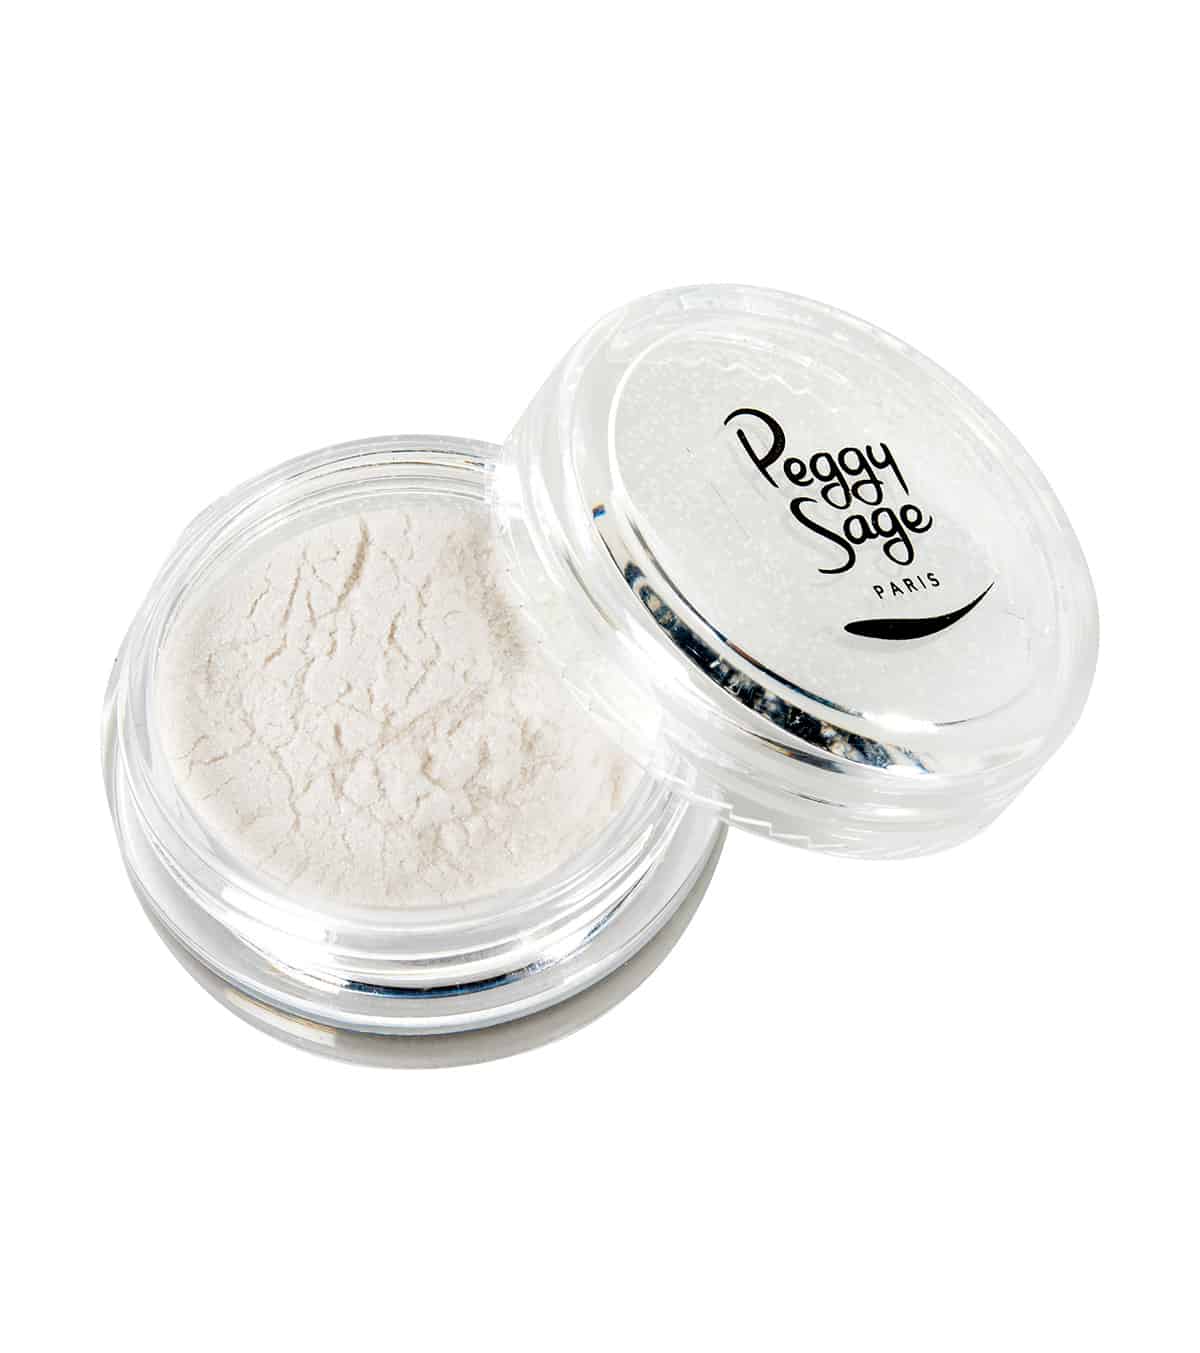 Peggy sage nail pigment 1g white pearl